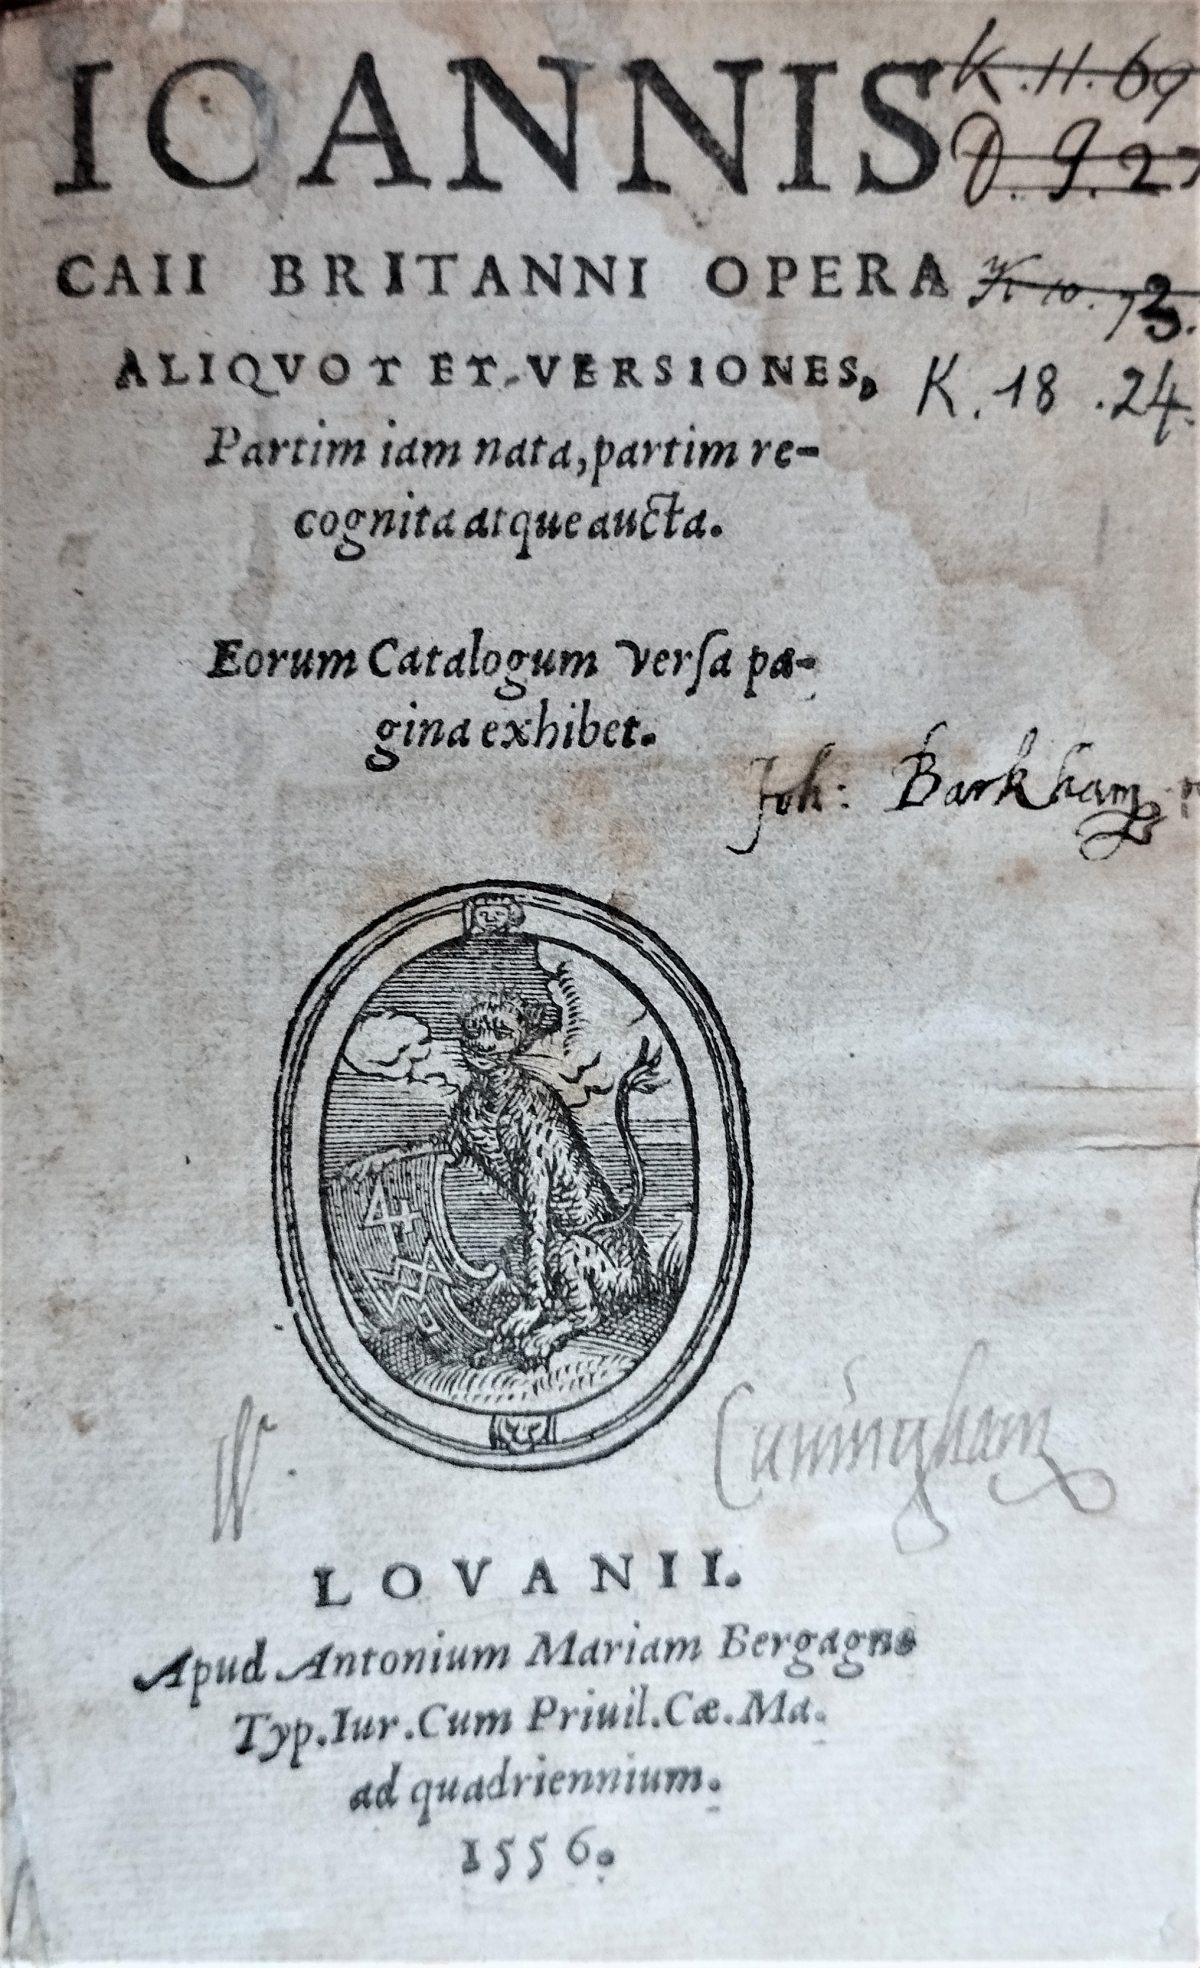 Title page of the book "De Canibus" by John Caius (1556). Several handwritten notes and a printer's device showing a dog. 